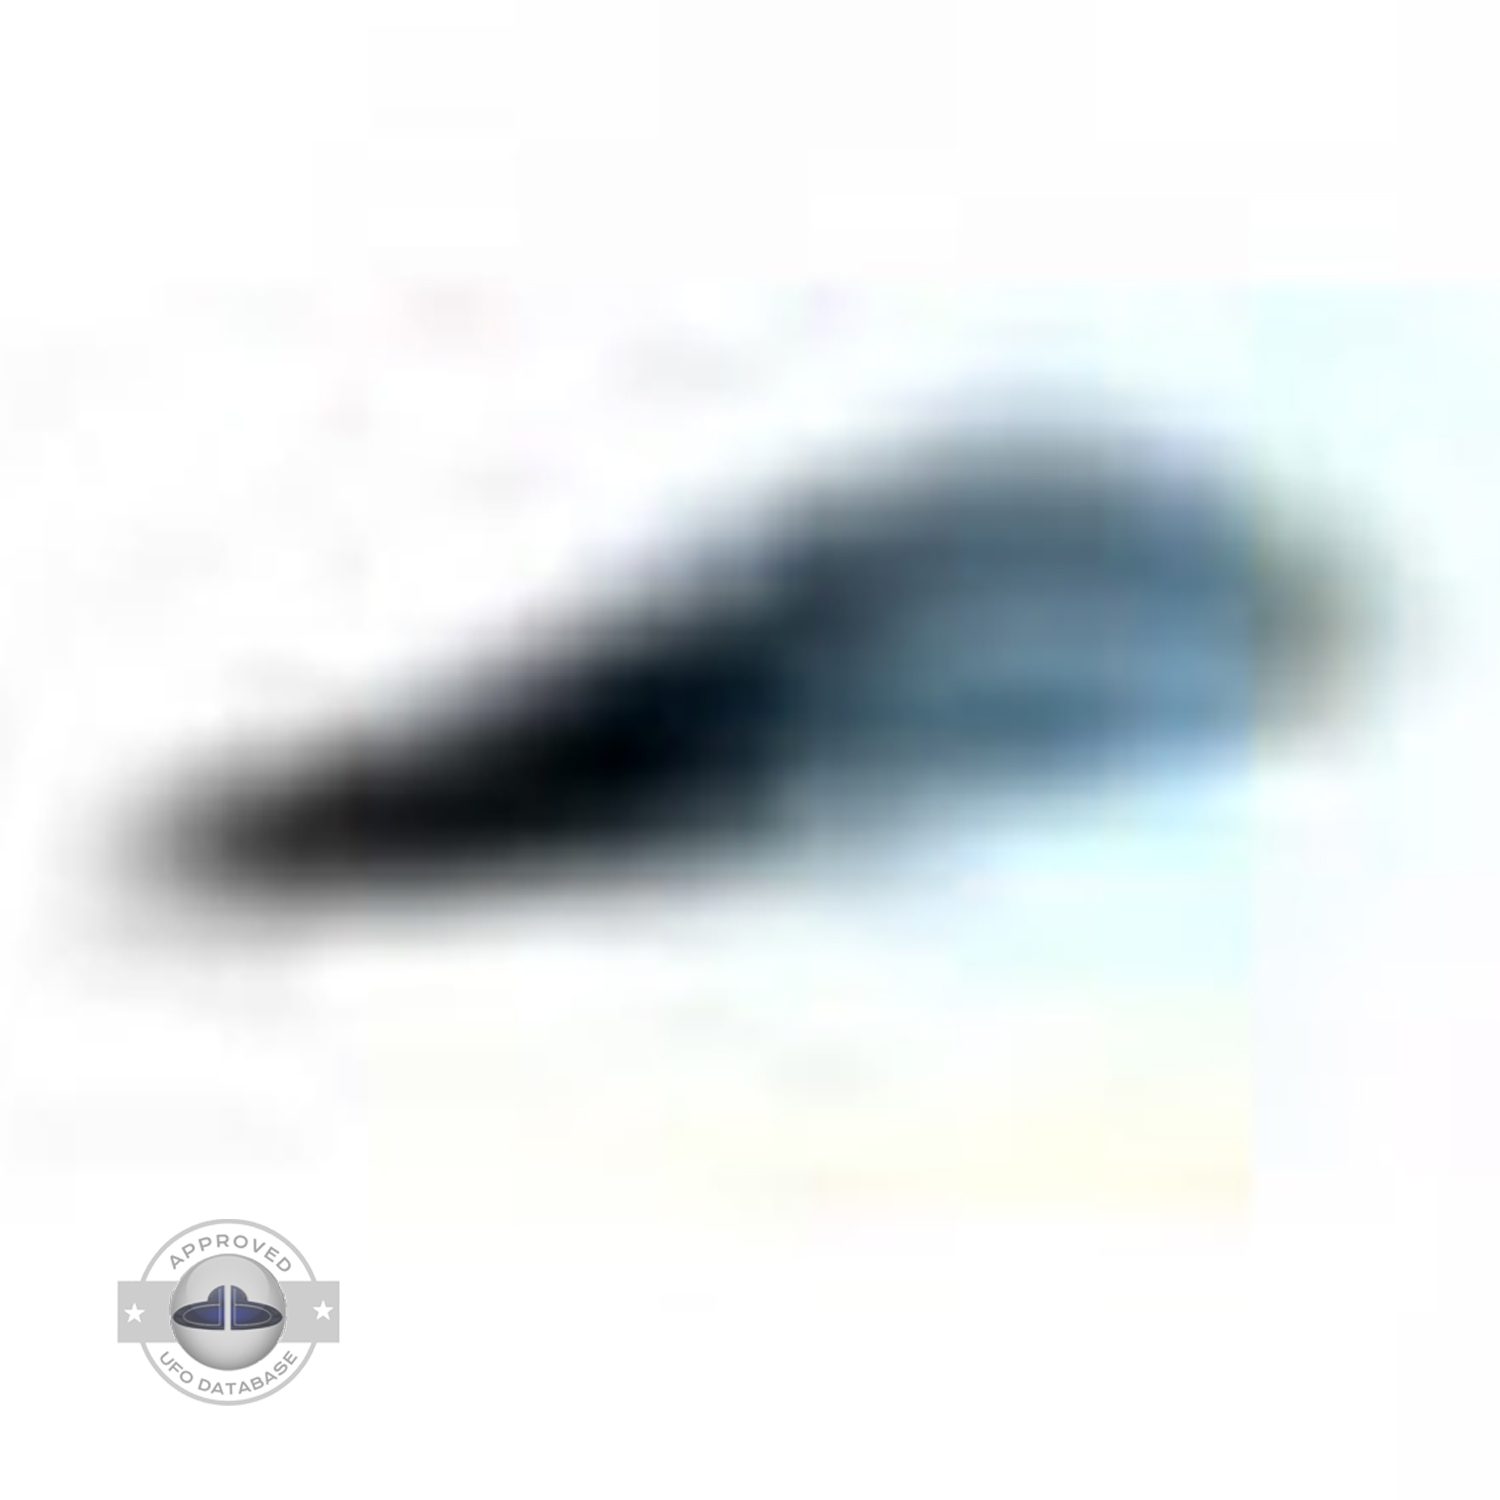 we can see people in a small boat, and behind them a UFO passing UFO Picture #40-5